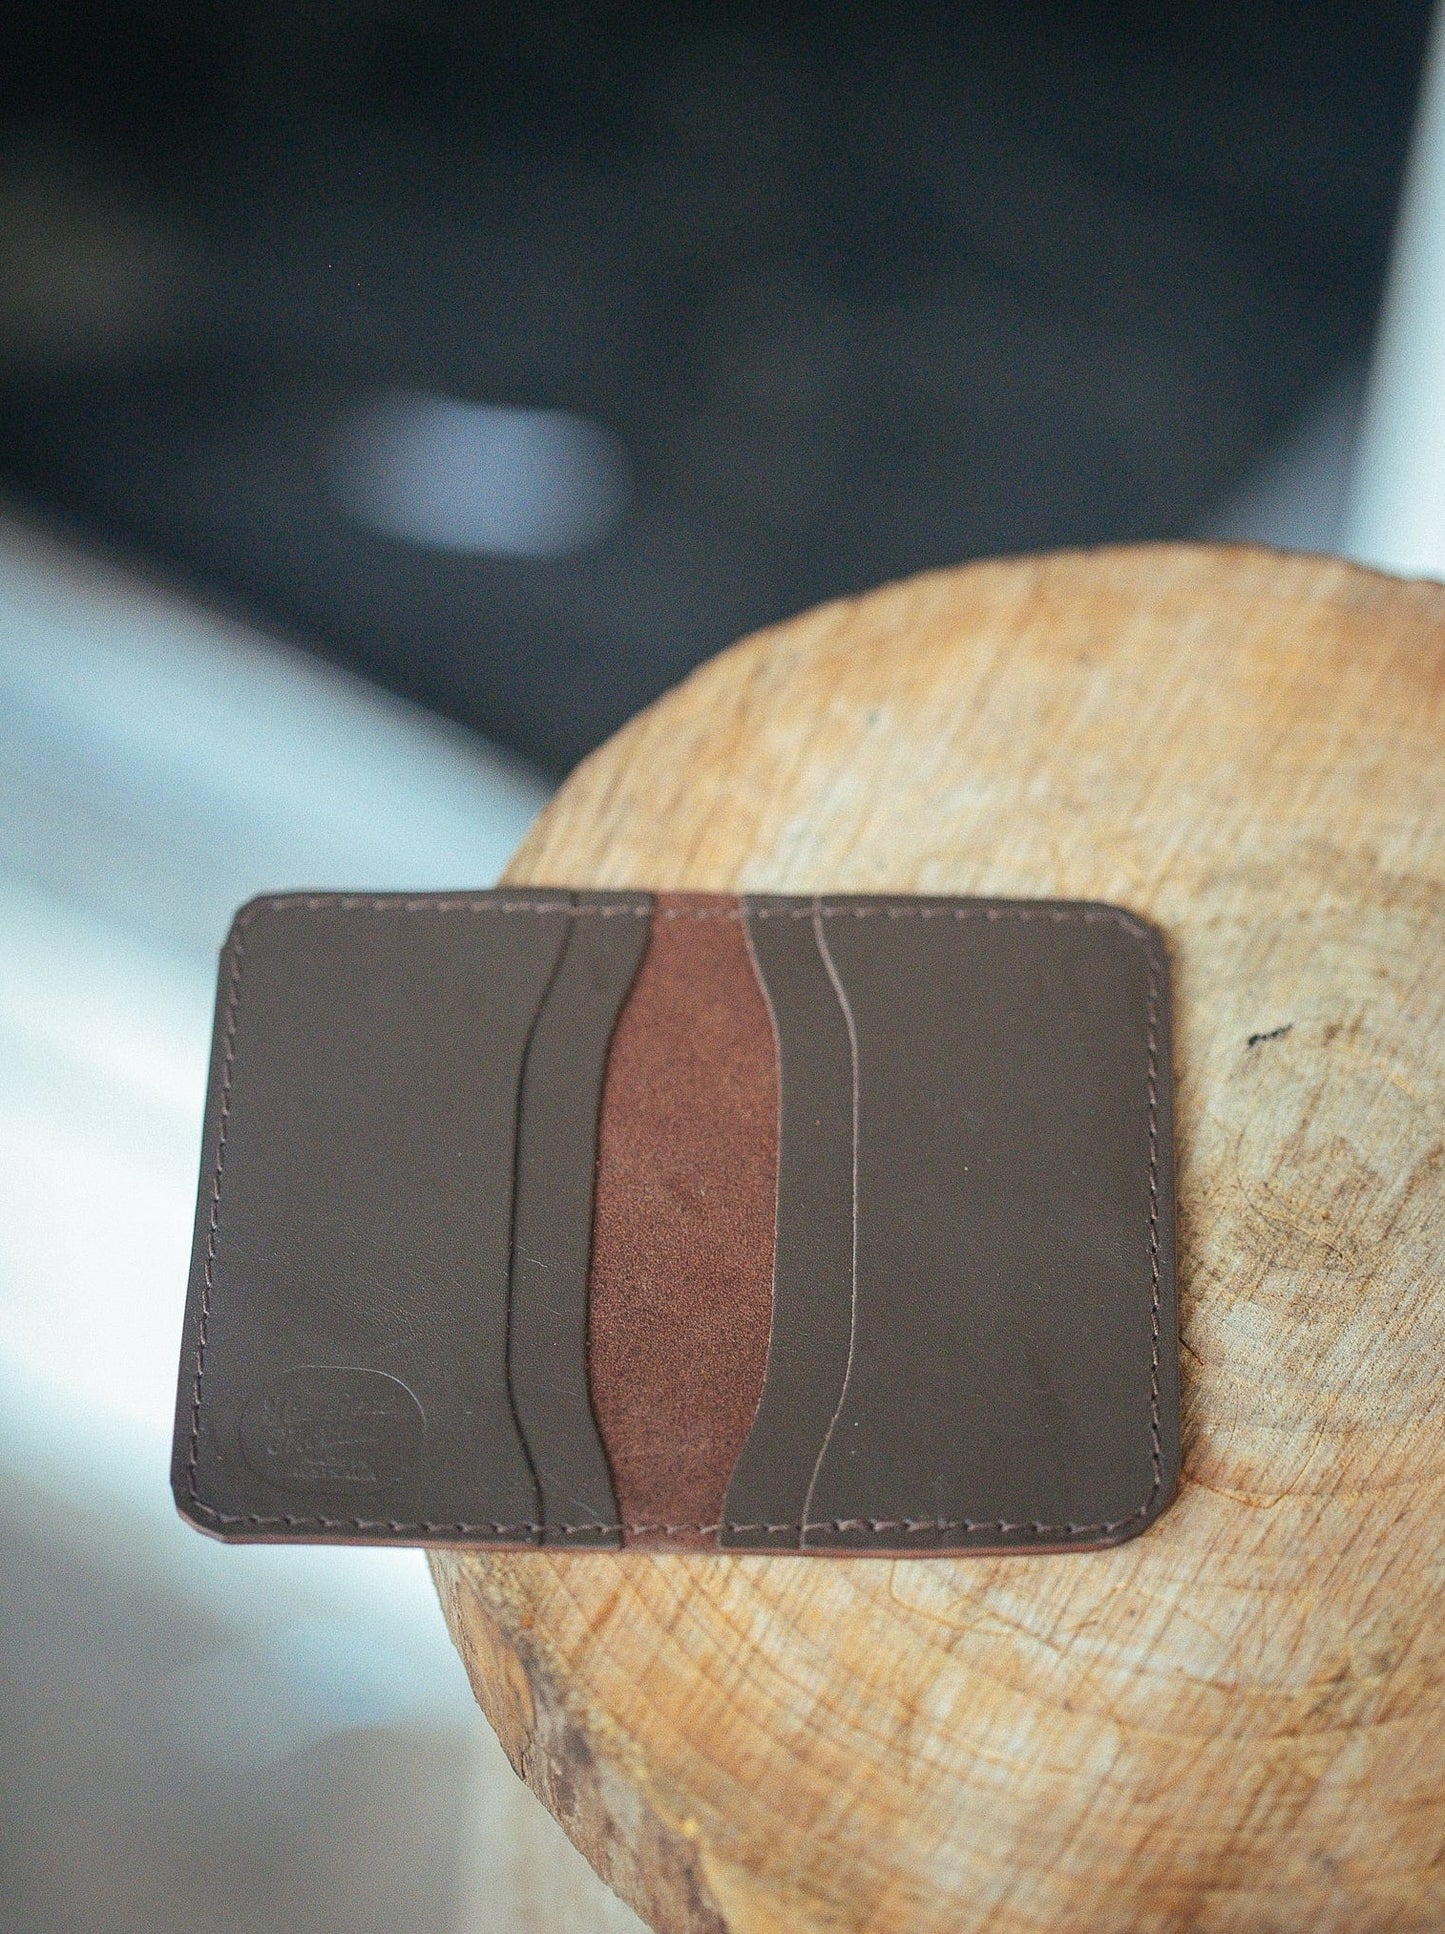 The Real McCaul Leathergoods Wallets 4 Slot Card Wallet Australian Made Australian Owned Leather 2 Card Wallet Holder Made In Australia 